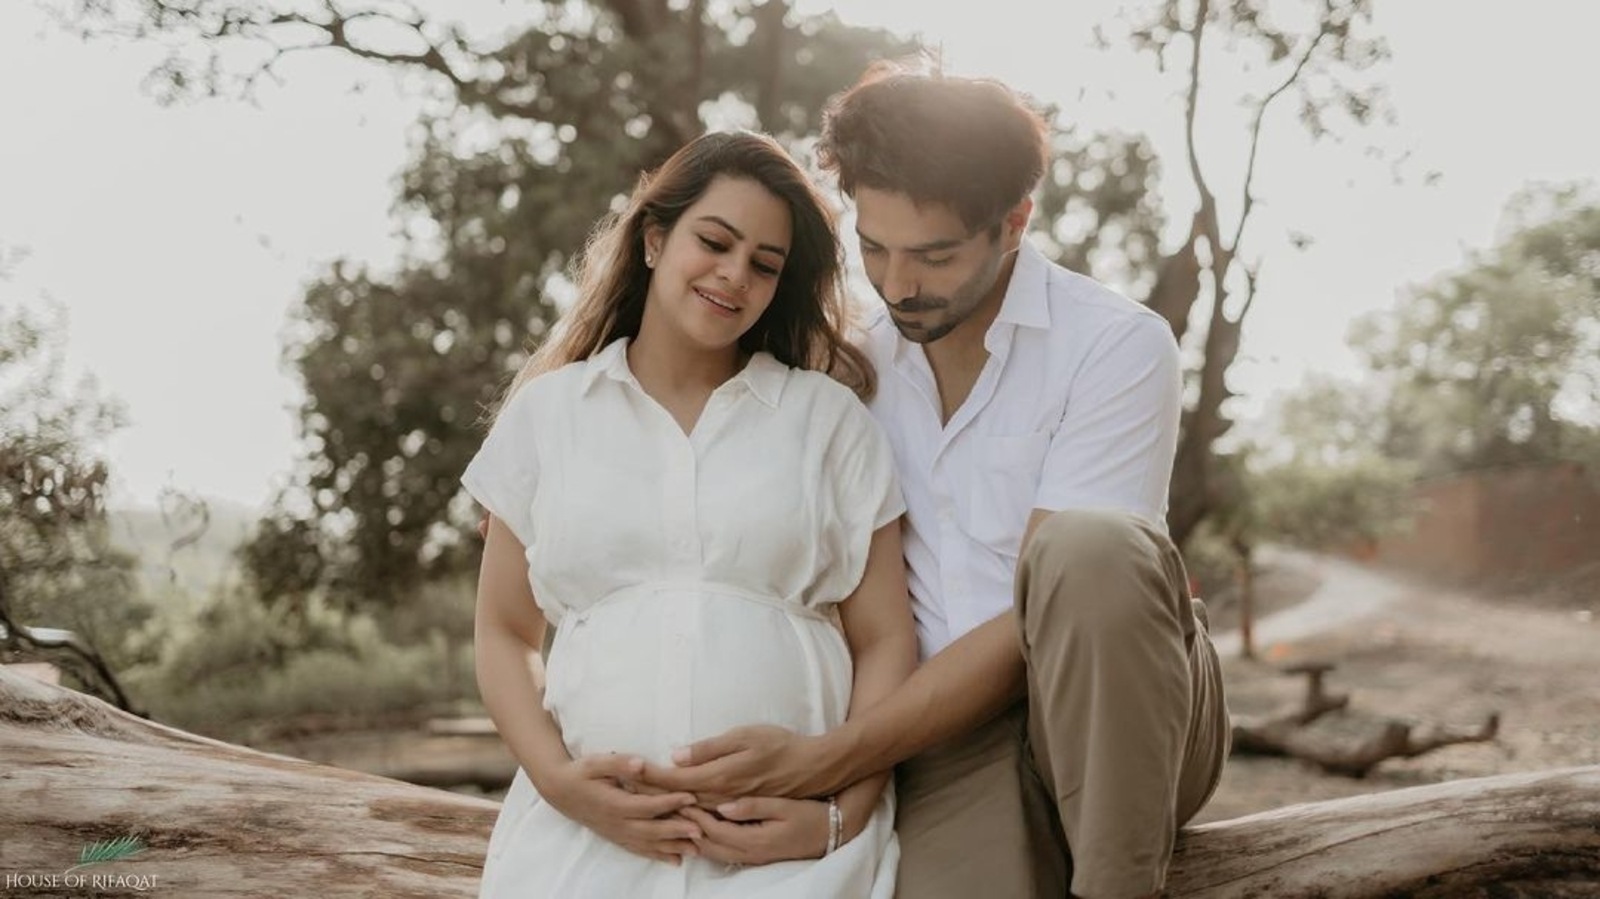 Aparshakti Khurana and Aakriti Ahuja, expecting their first child, share pictures from maternity shoot | Bollywood - Hindustan Times